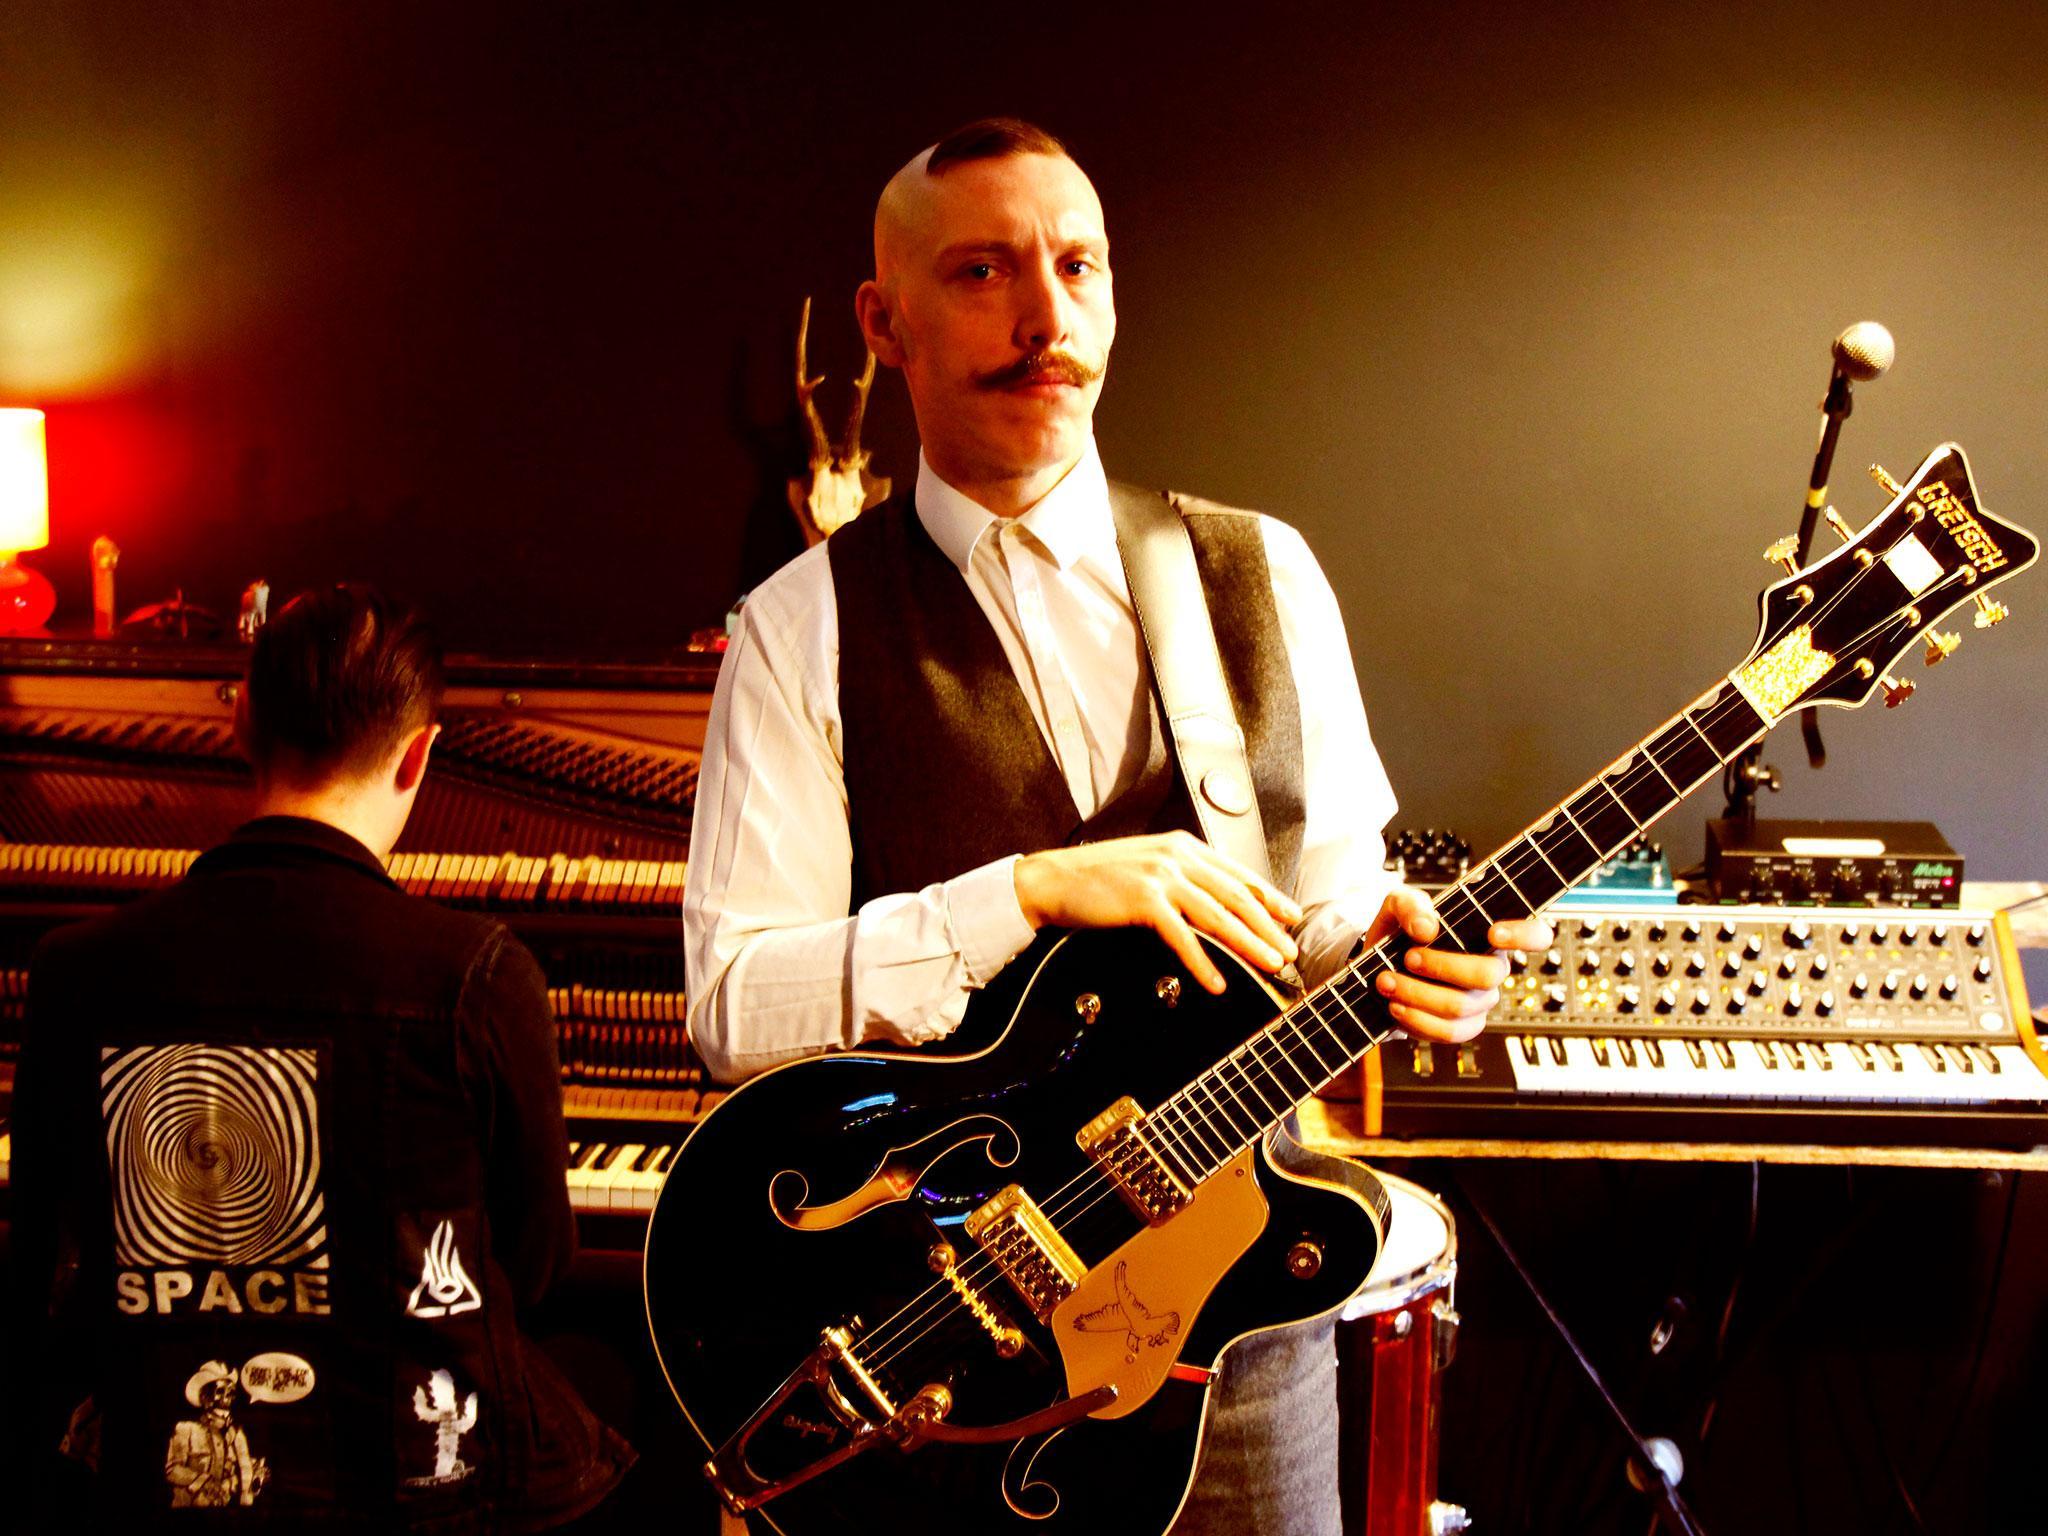 Jamie Lenman with producer Space in the studio